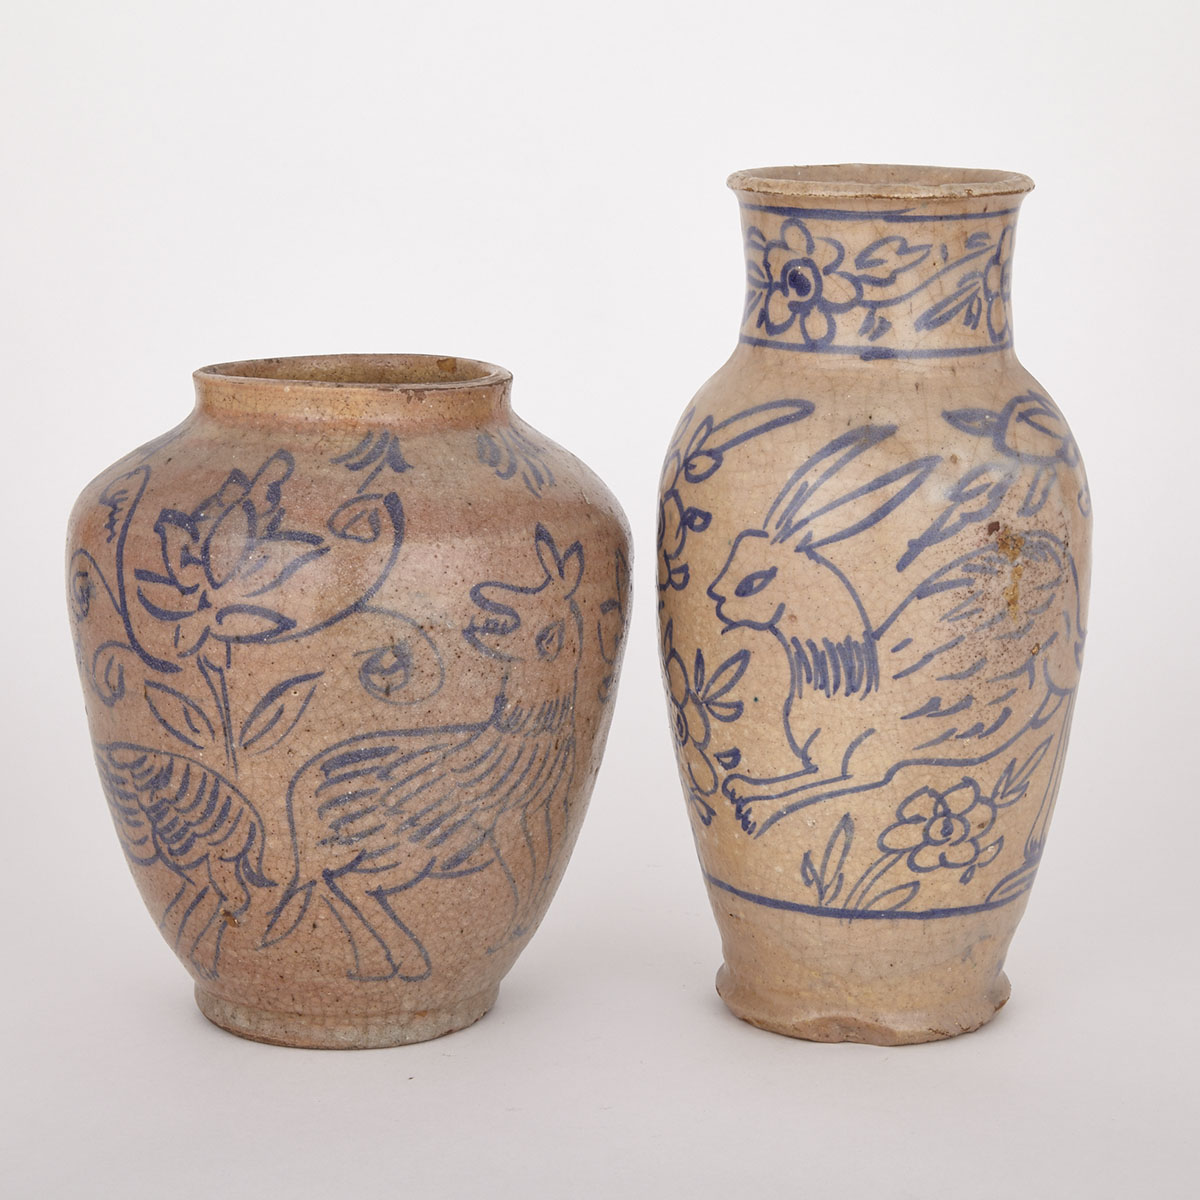 Two Pottery Vessels, Possibly Syria or Iran